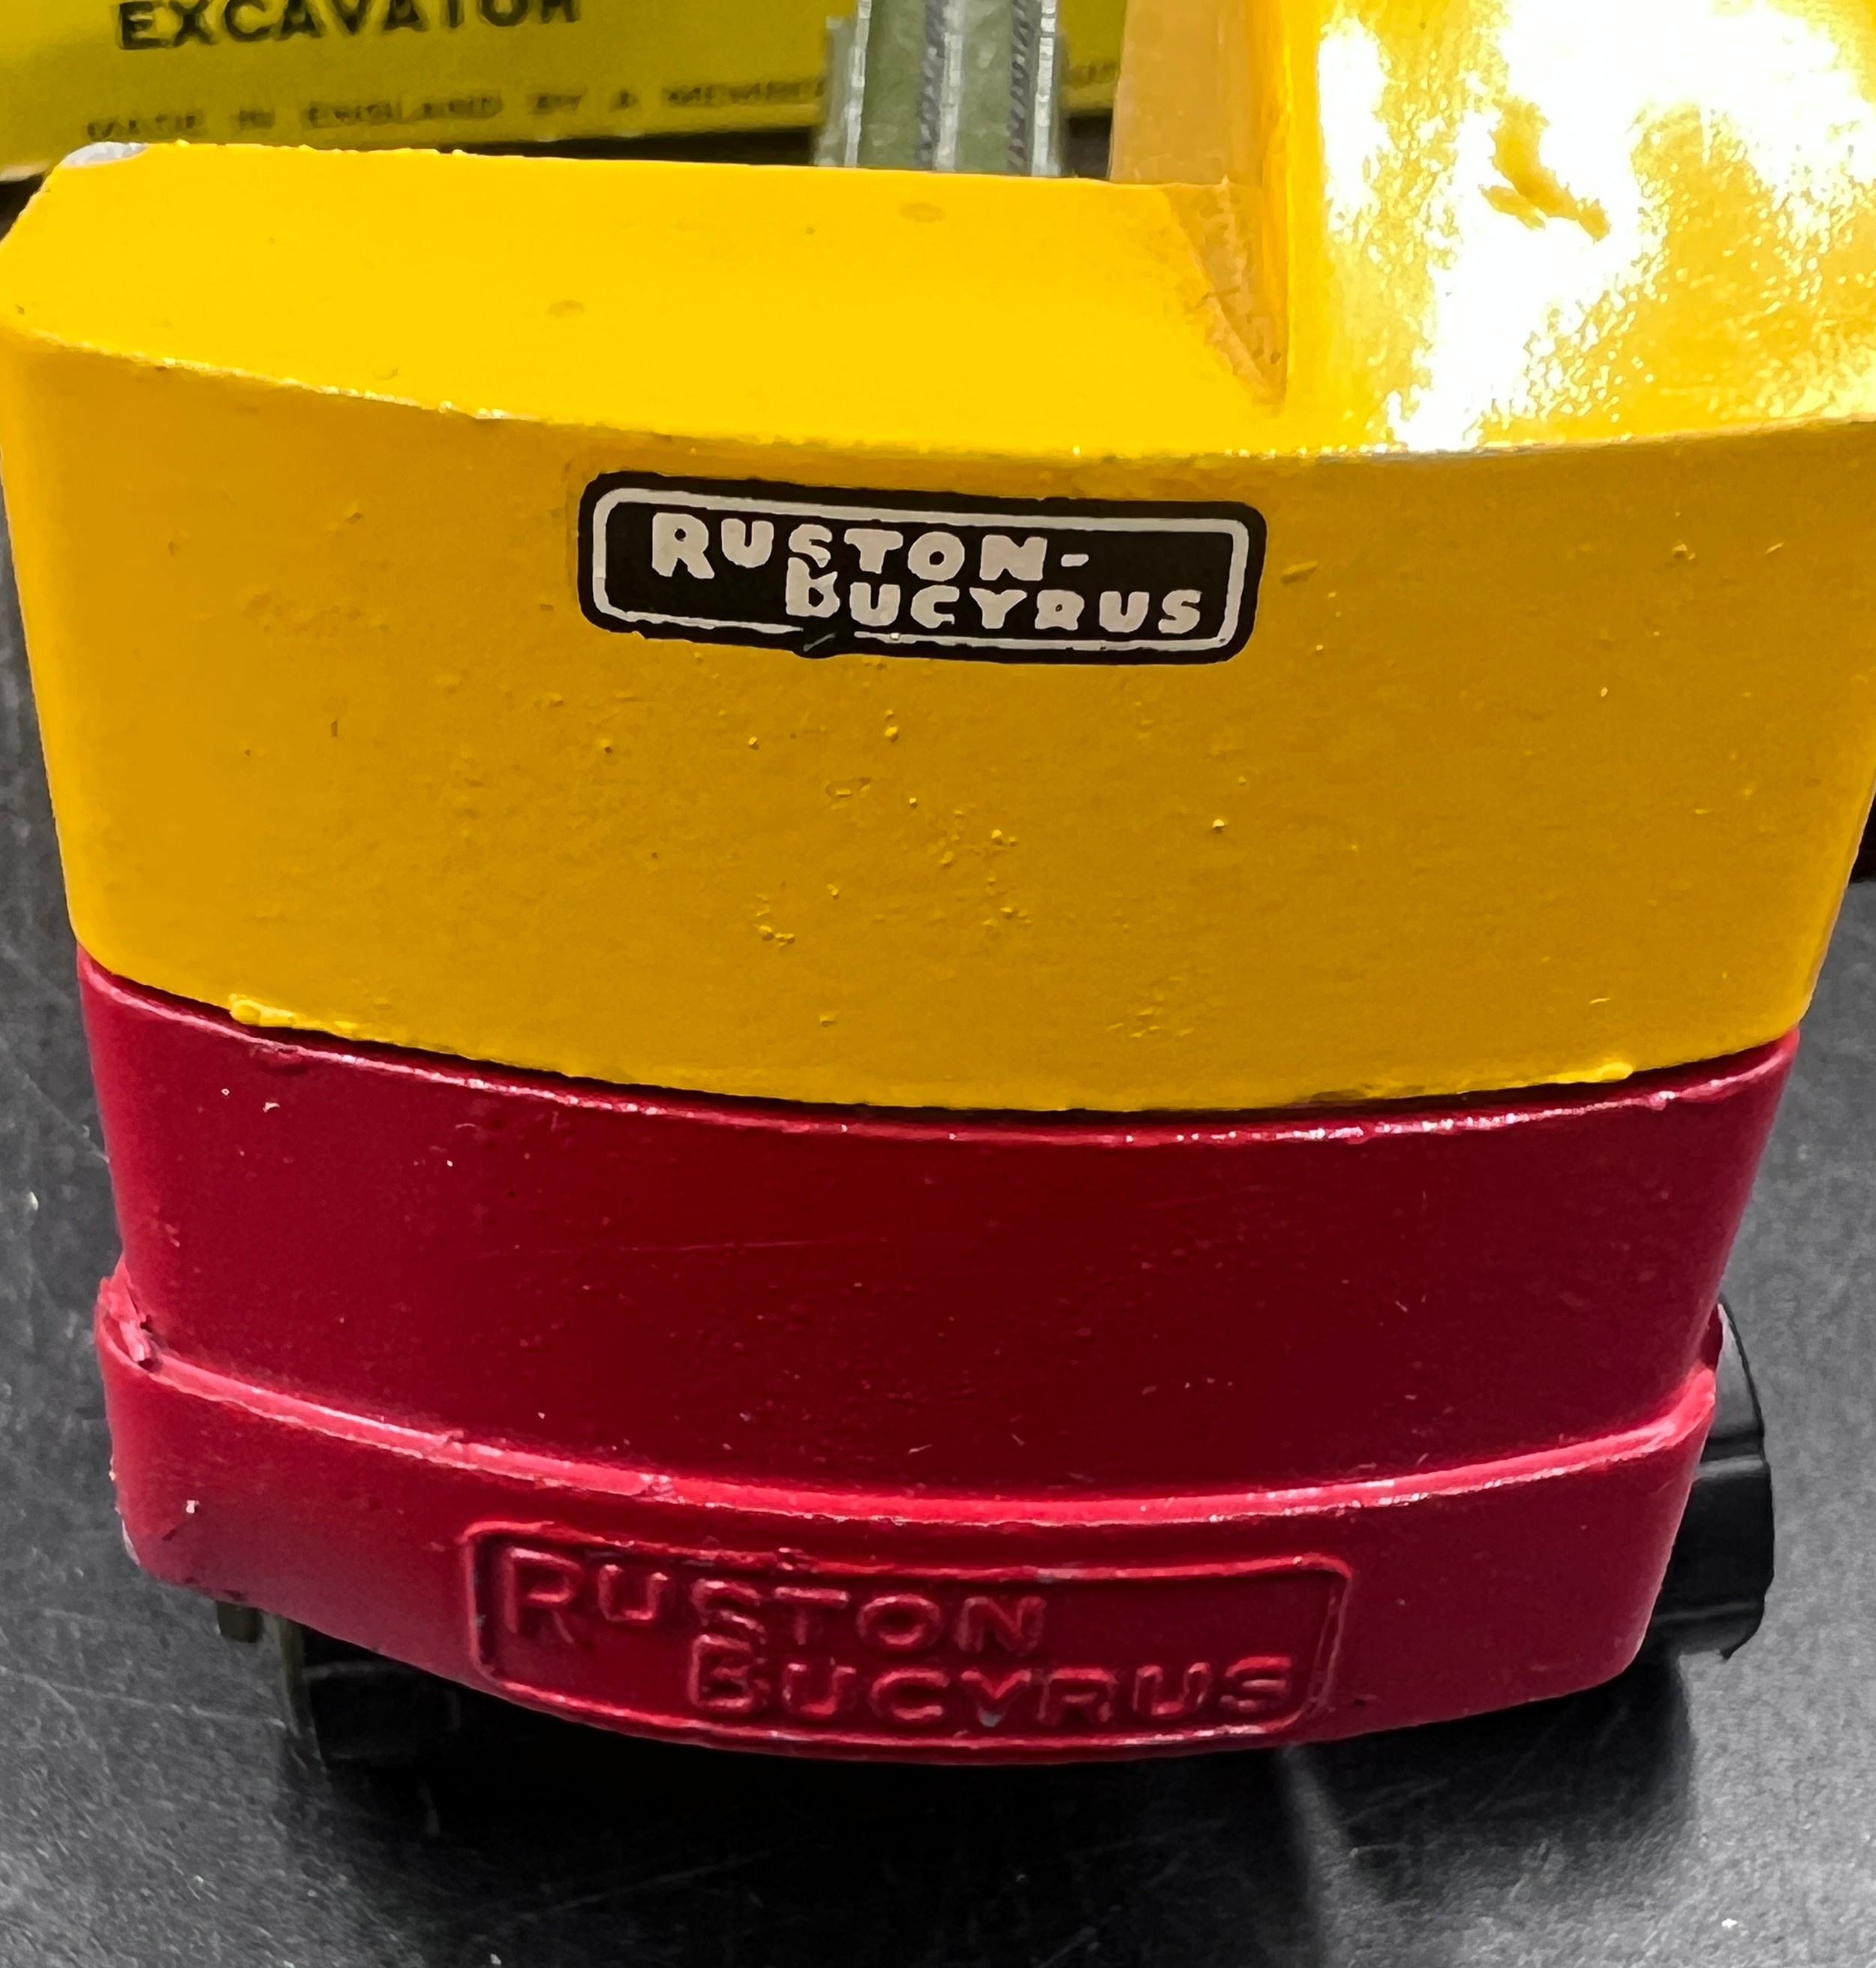 A boxed Ruston Bucyrus Working Model Excavator 10-RB. No.260. Finished in yellow and red, with - Bild 5 aus 9